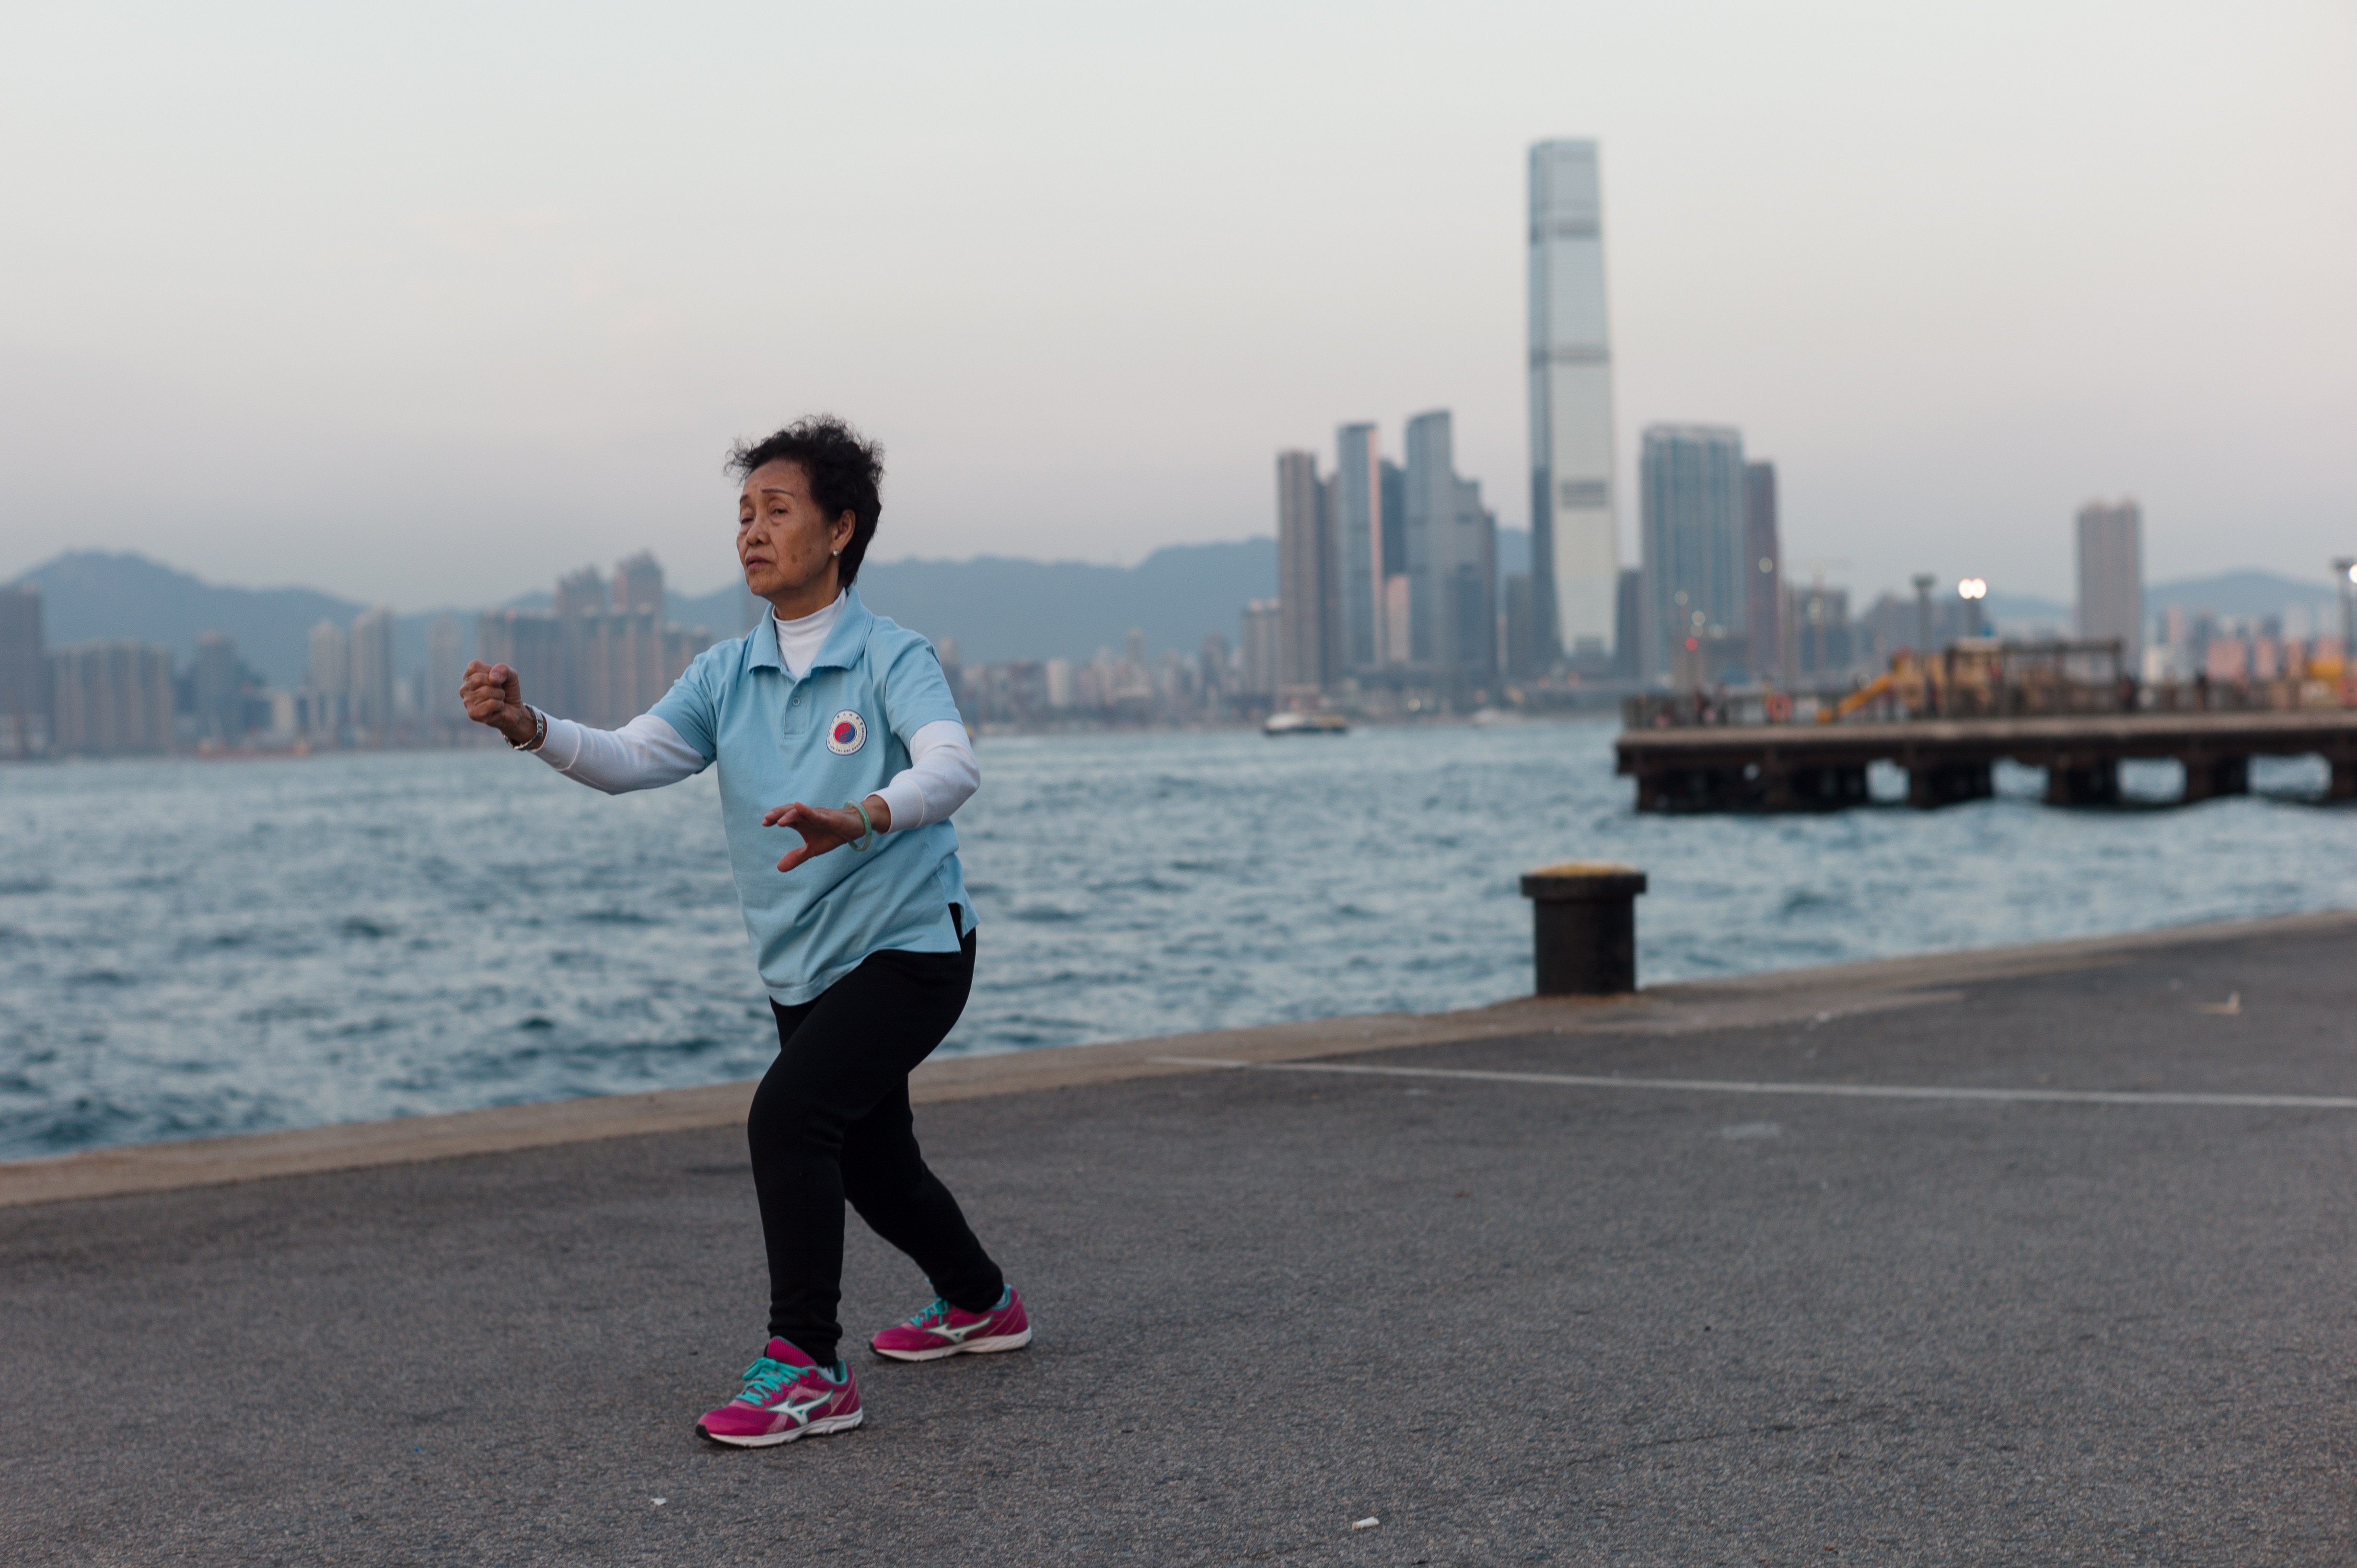 By 2030, one in every four Hongkongers is expected to be aged 65 or over. As the elderly are more susceptible to chronic diseases, one immediate question is: how can the public health system keep up with the change? Photo: EPA-EFE